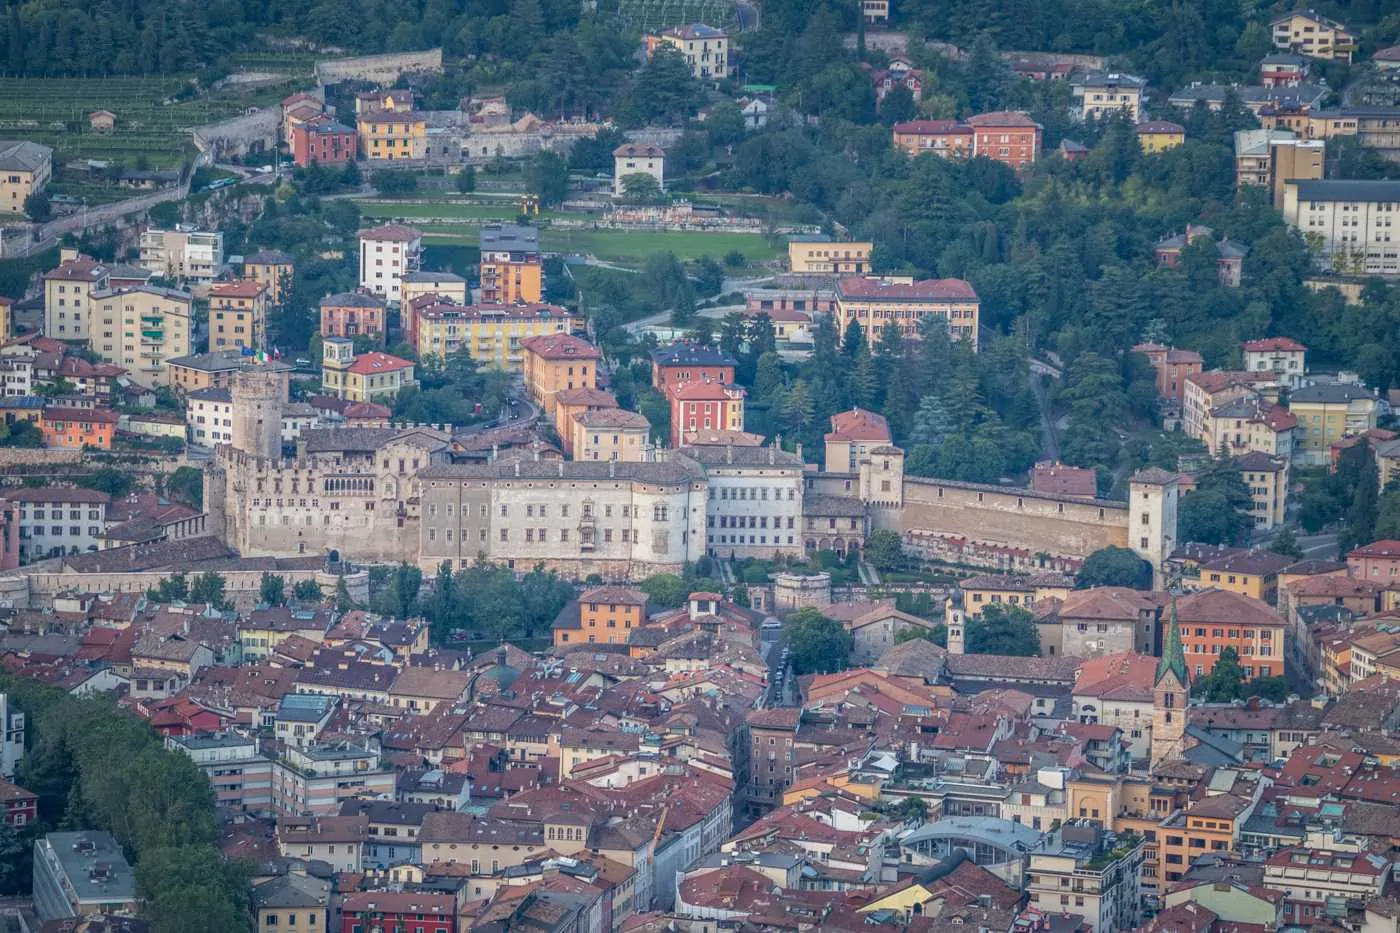 trento castle seen from the highest viewpoint in town